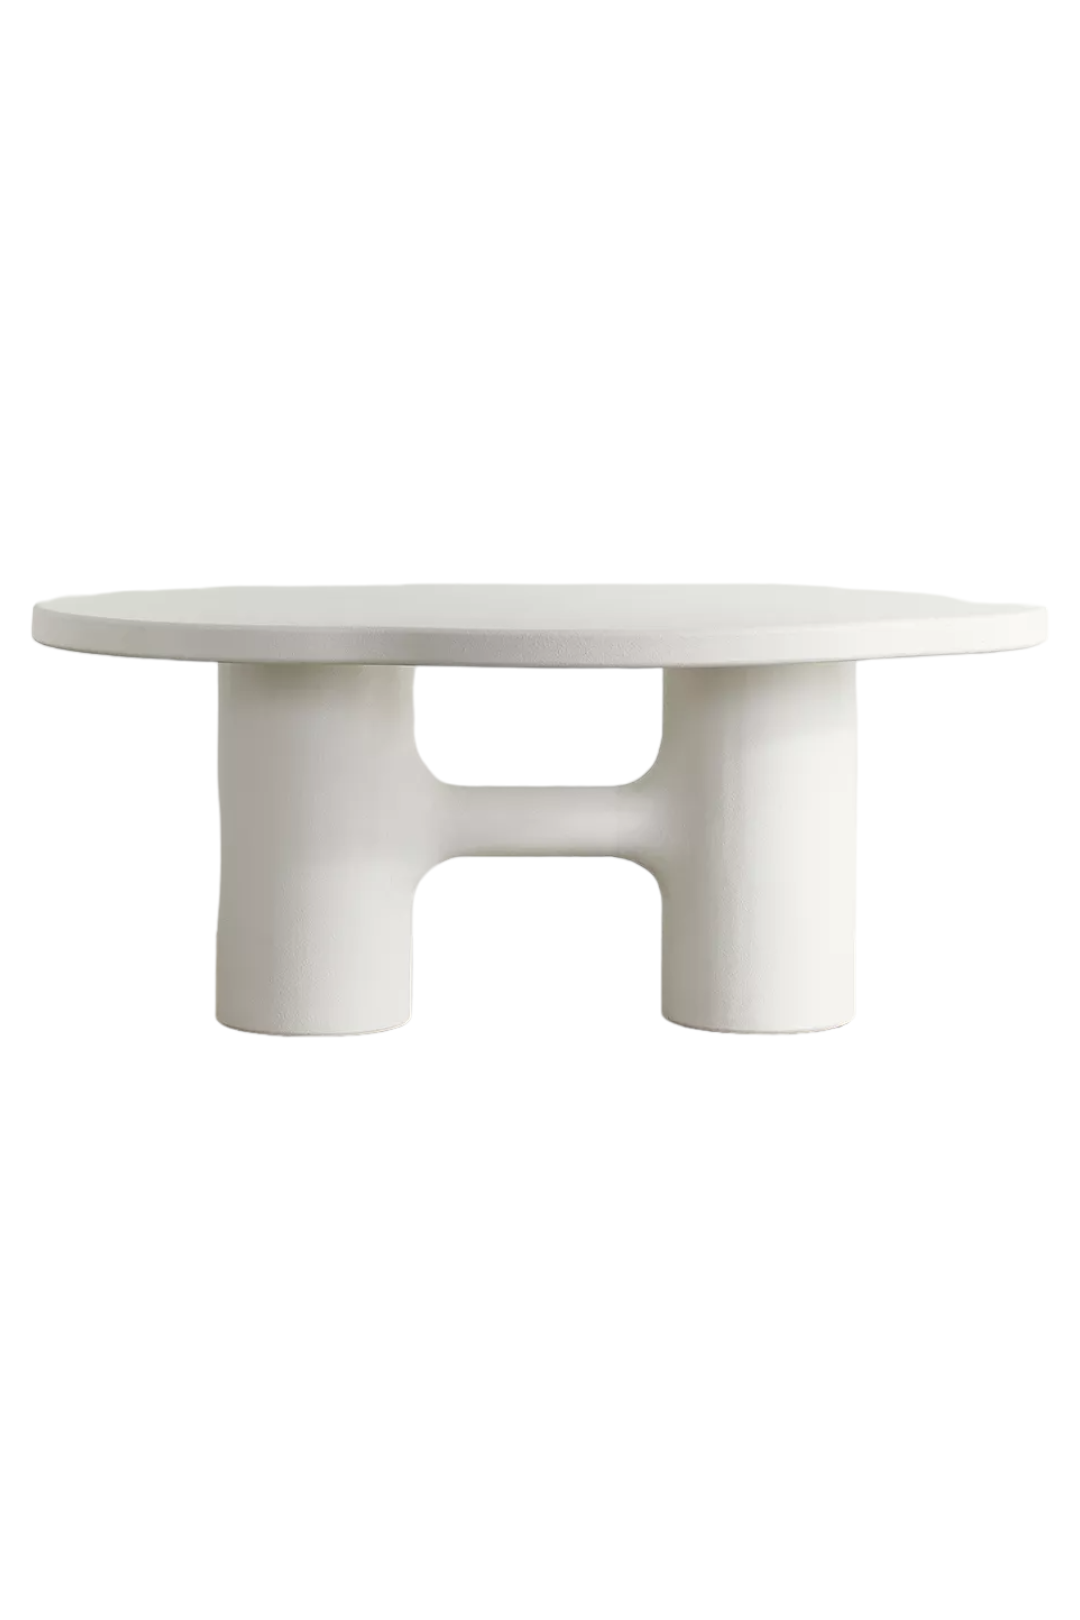 HAND MADE ATHENA WHITE MDF DINING TABLE